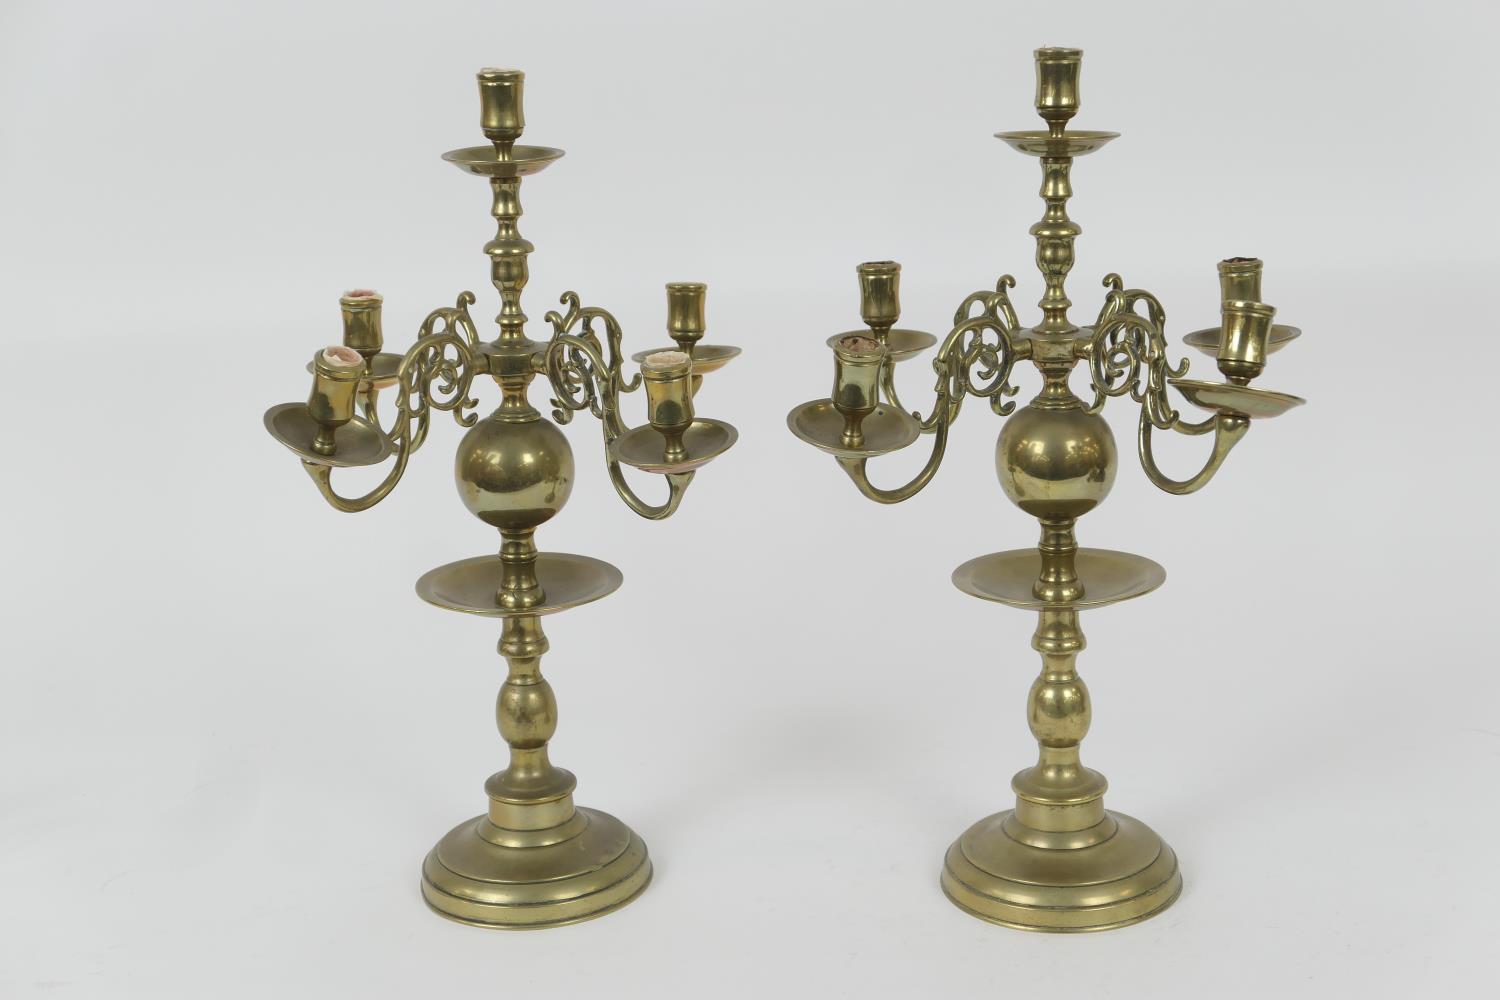 Pair of Dutch brass candlesticks, each with five sconces over multi-knopped columns with drip